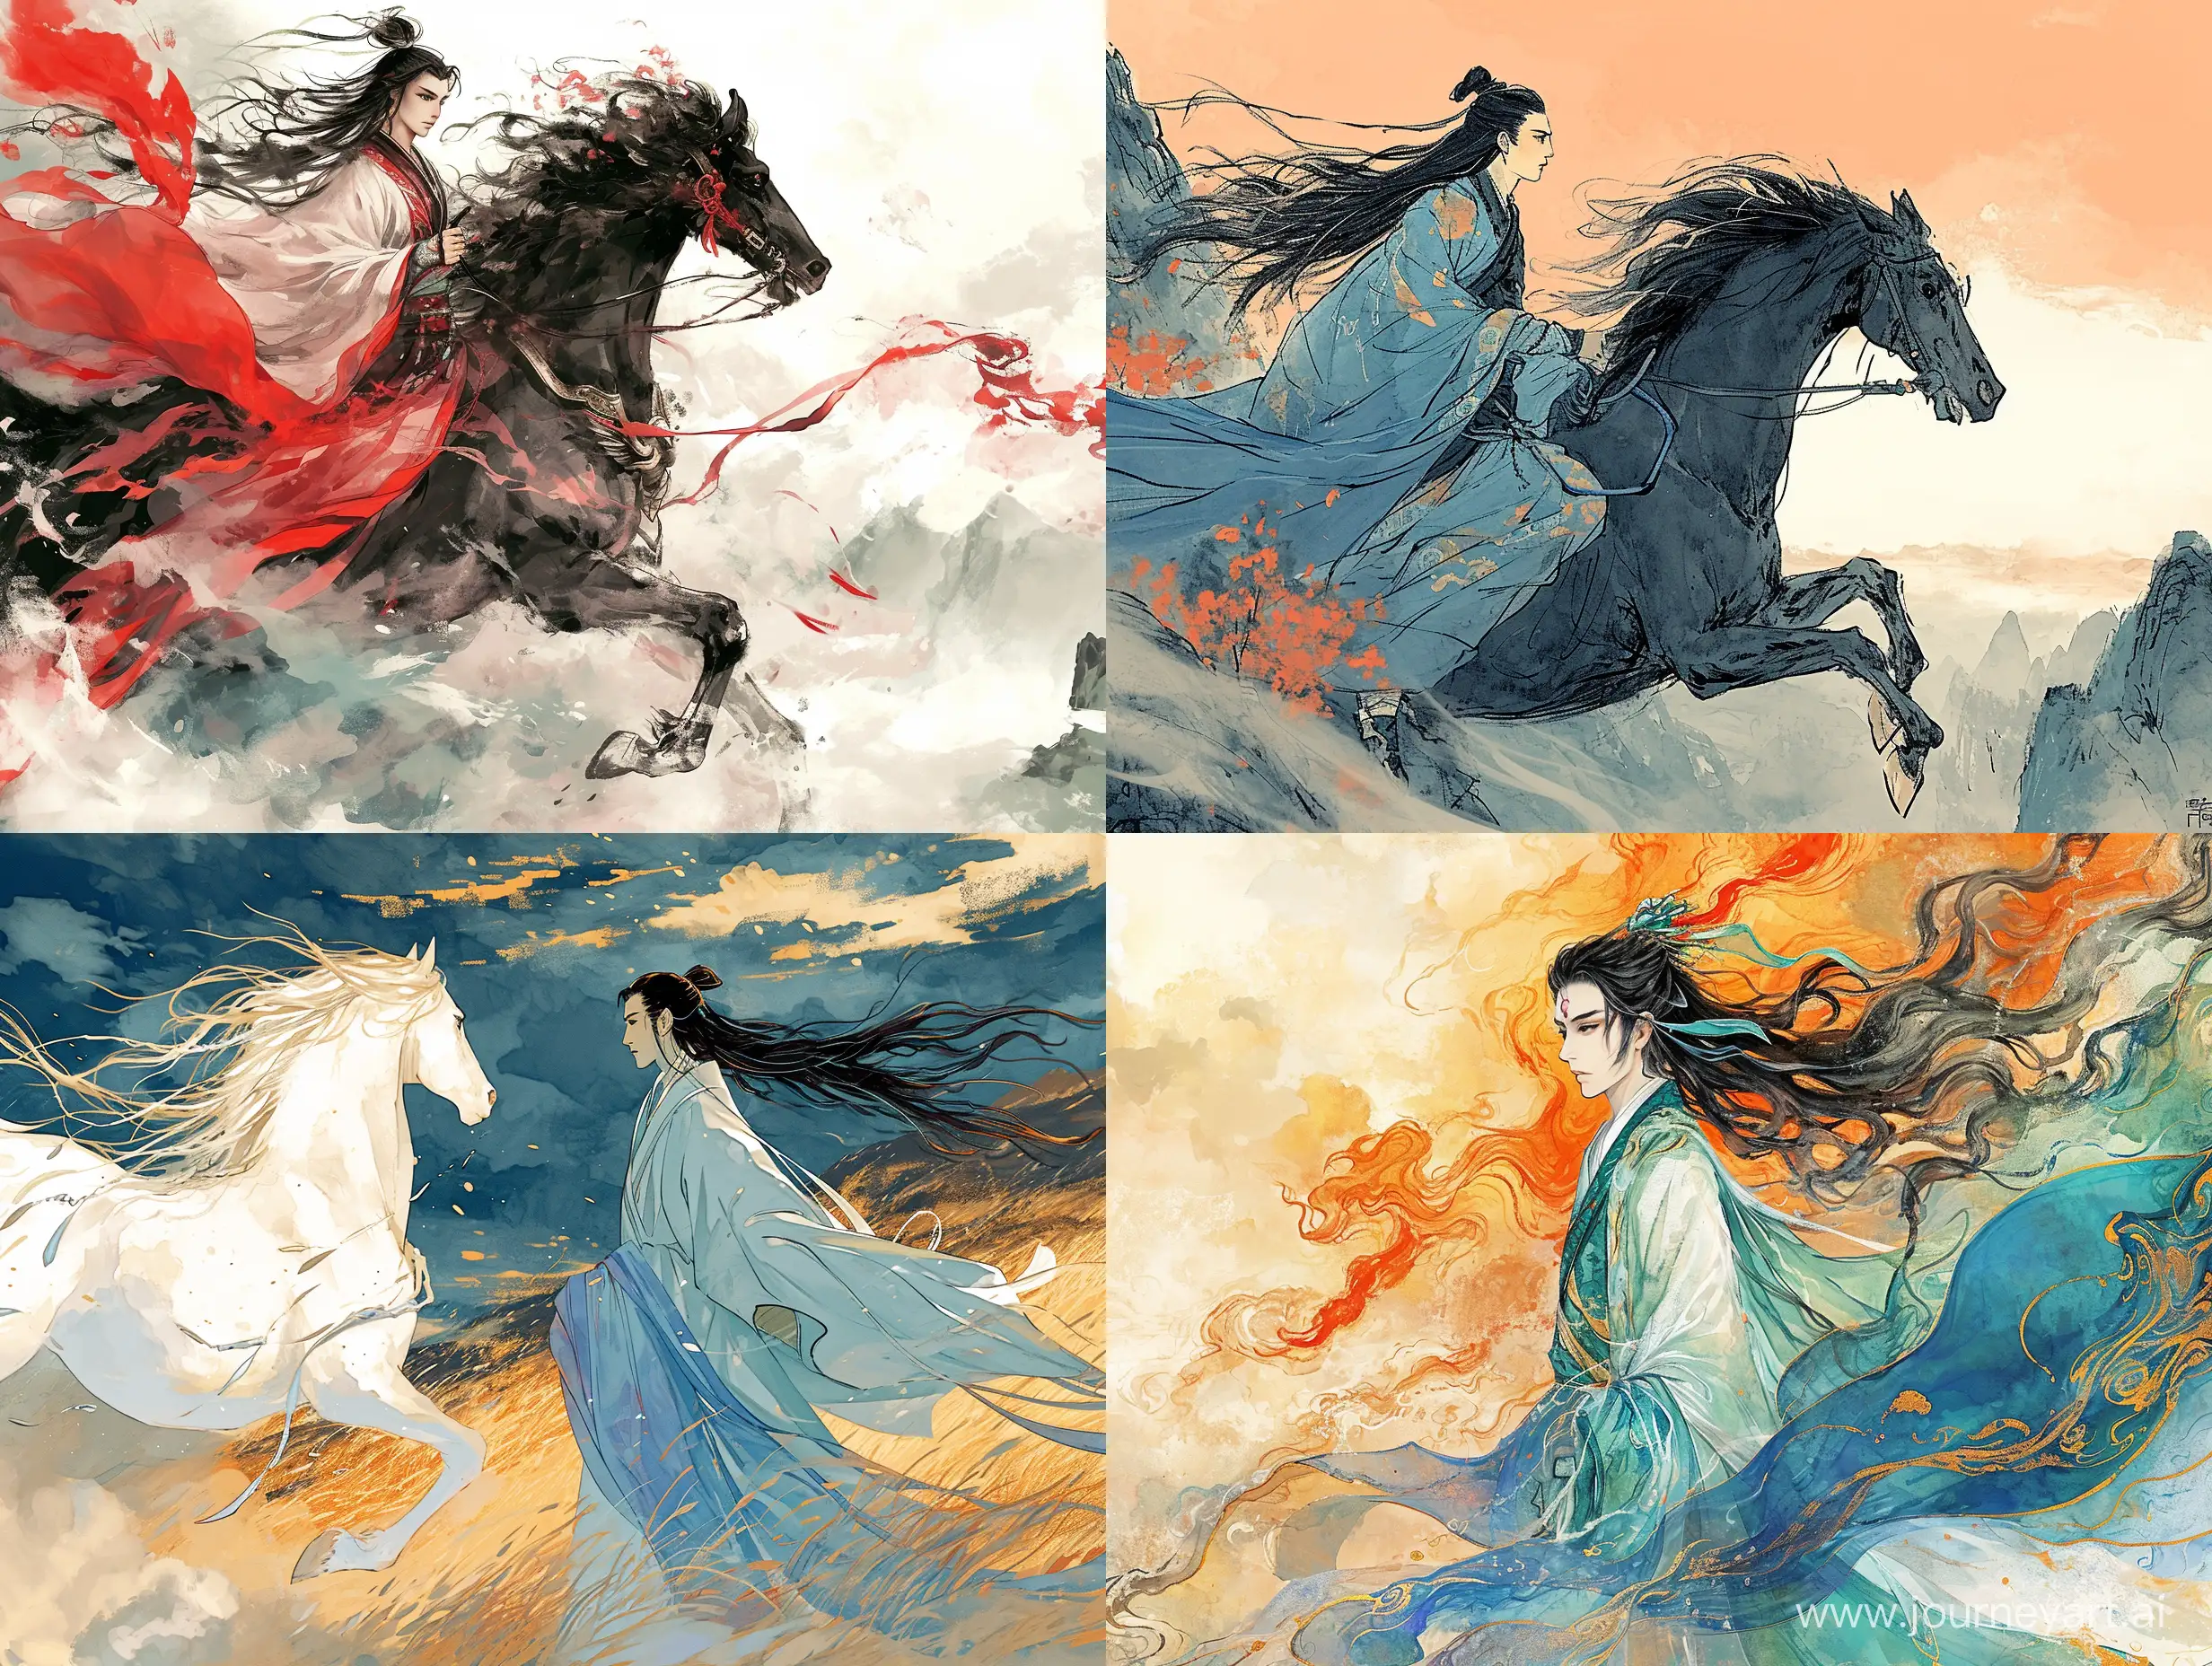 Majestic-Mountain-Pulling-Force-in-Vibrant-Chinese-Ink-Painting-Style